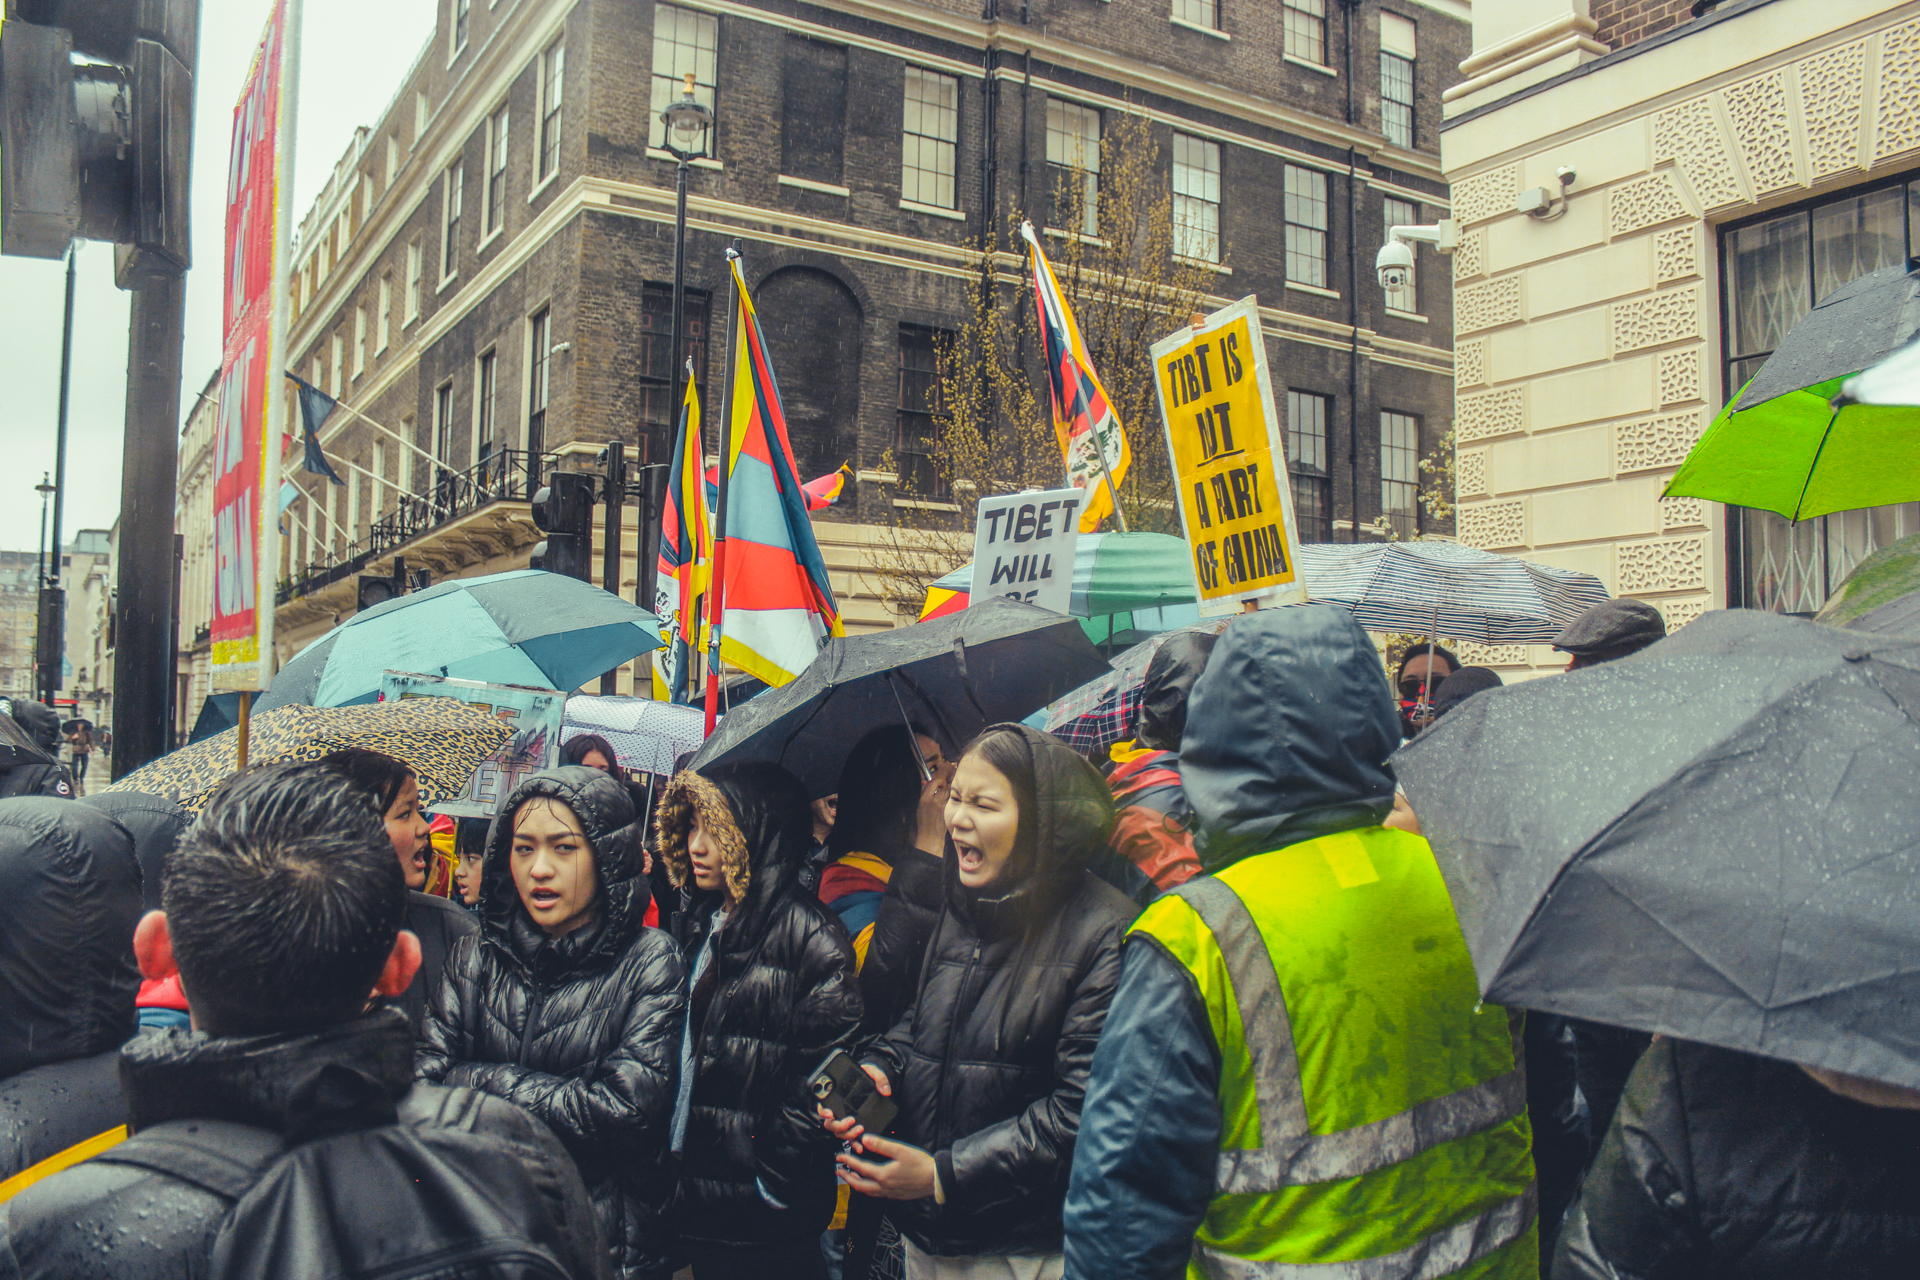 Protesters chant and shout for the freedom of Tibetans on the streets of London.